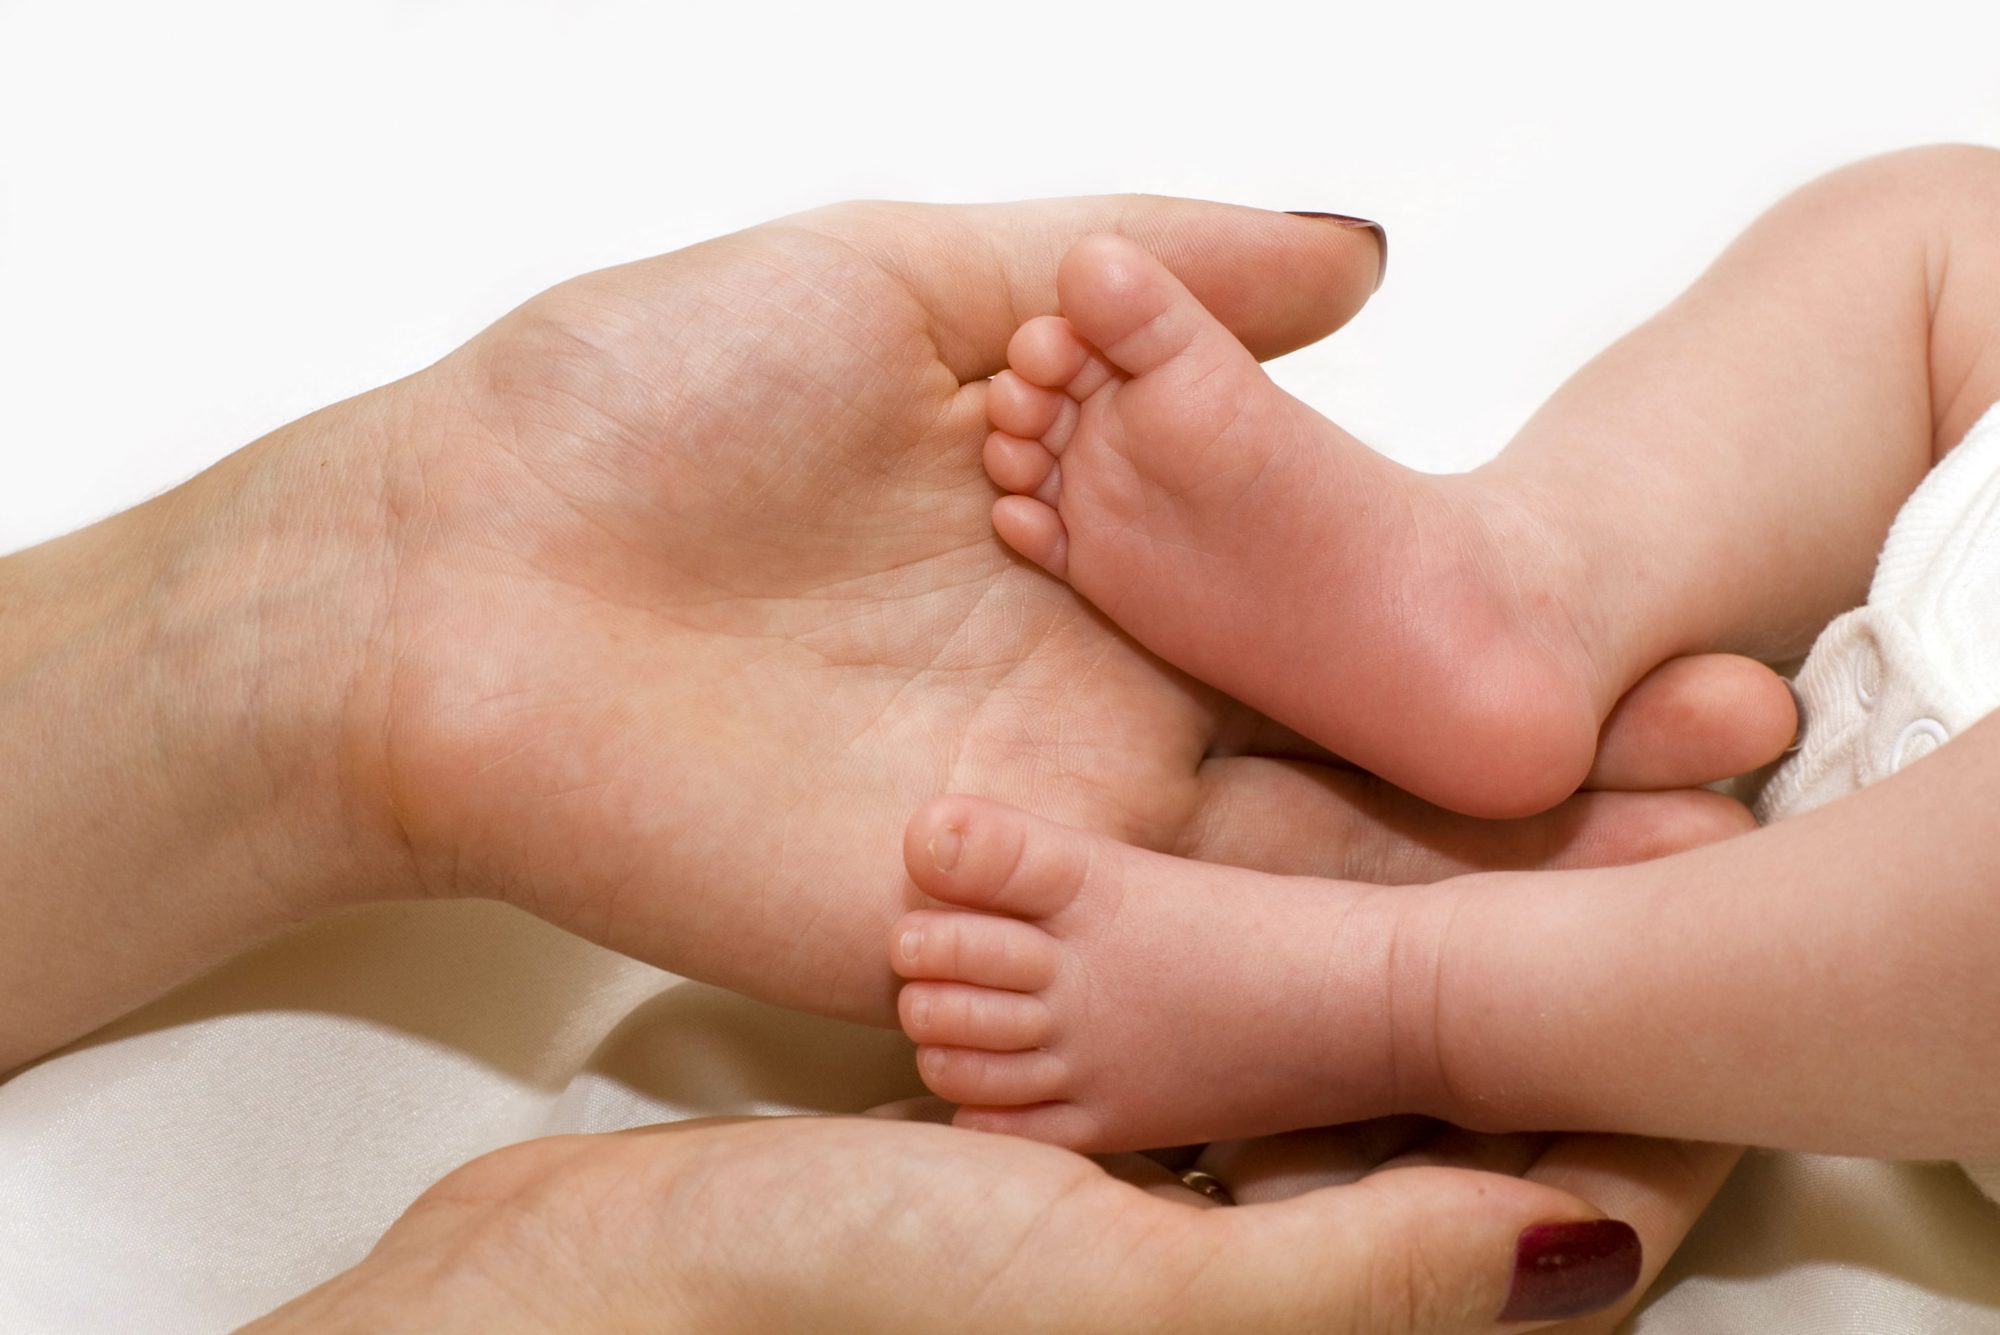 Mother's hand touching baby's feet